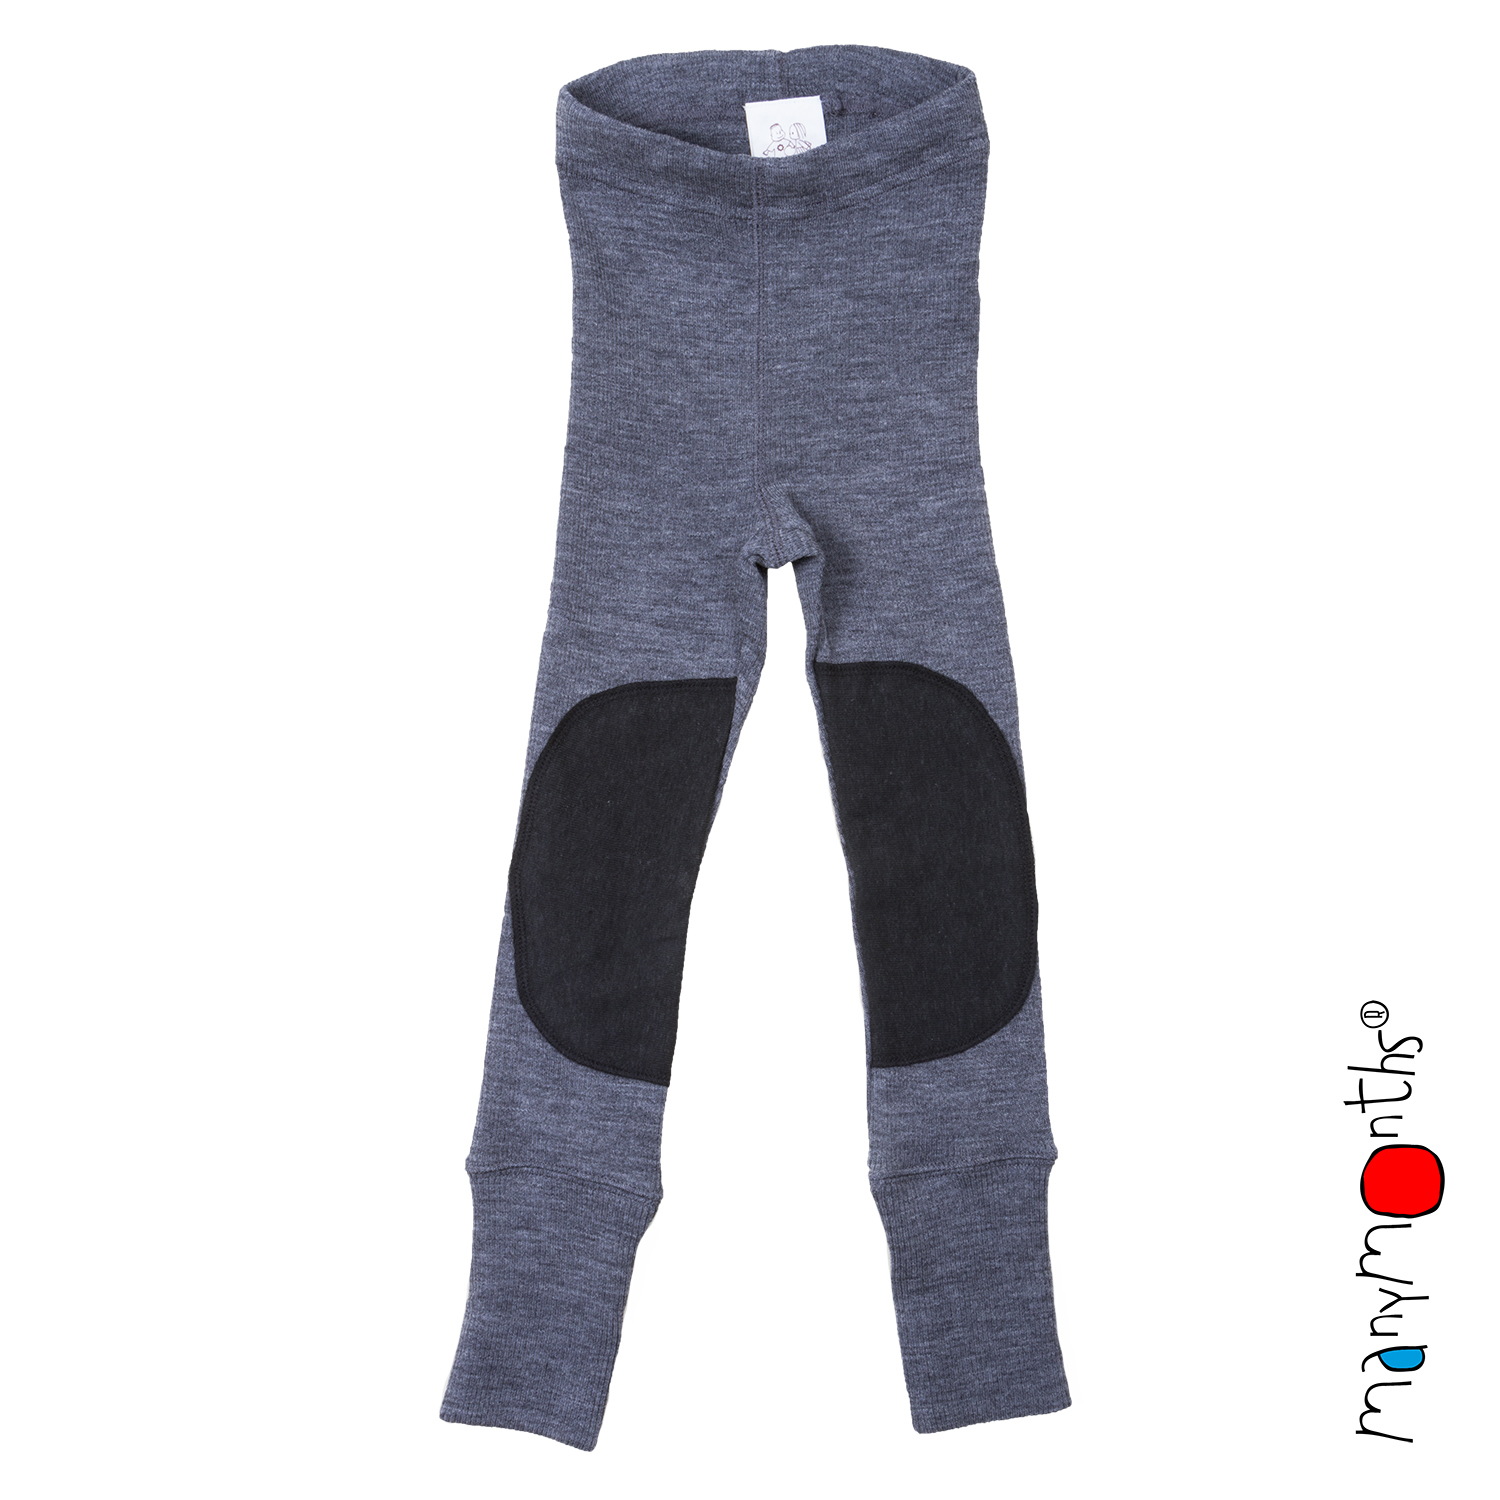 ManyMonths Natural Woollies Unisex Leggings with Knee Patches